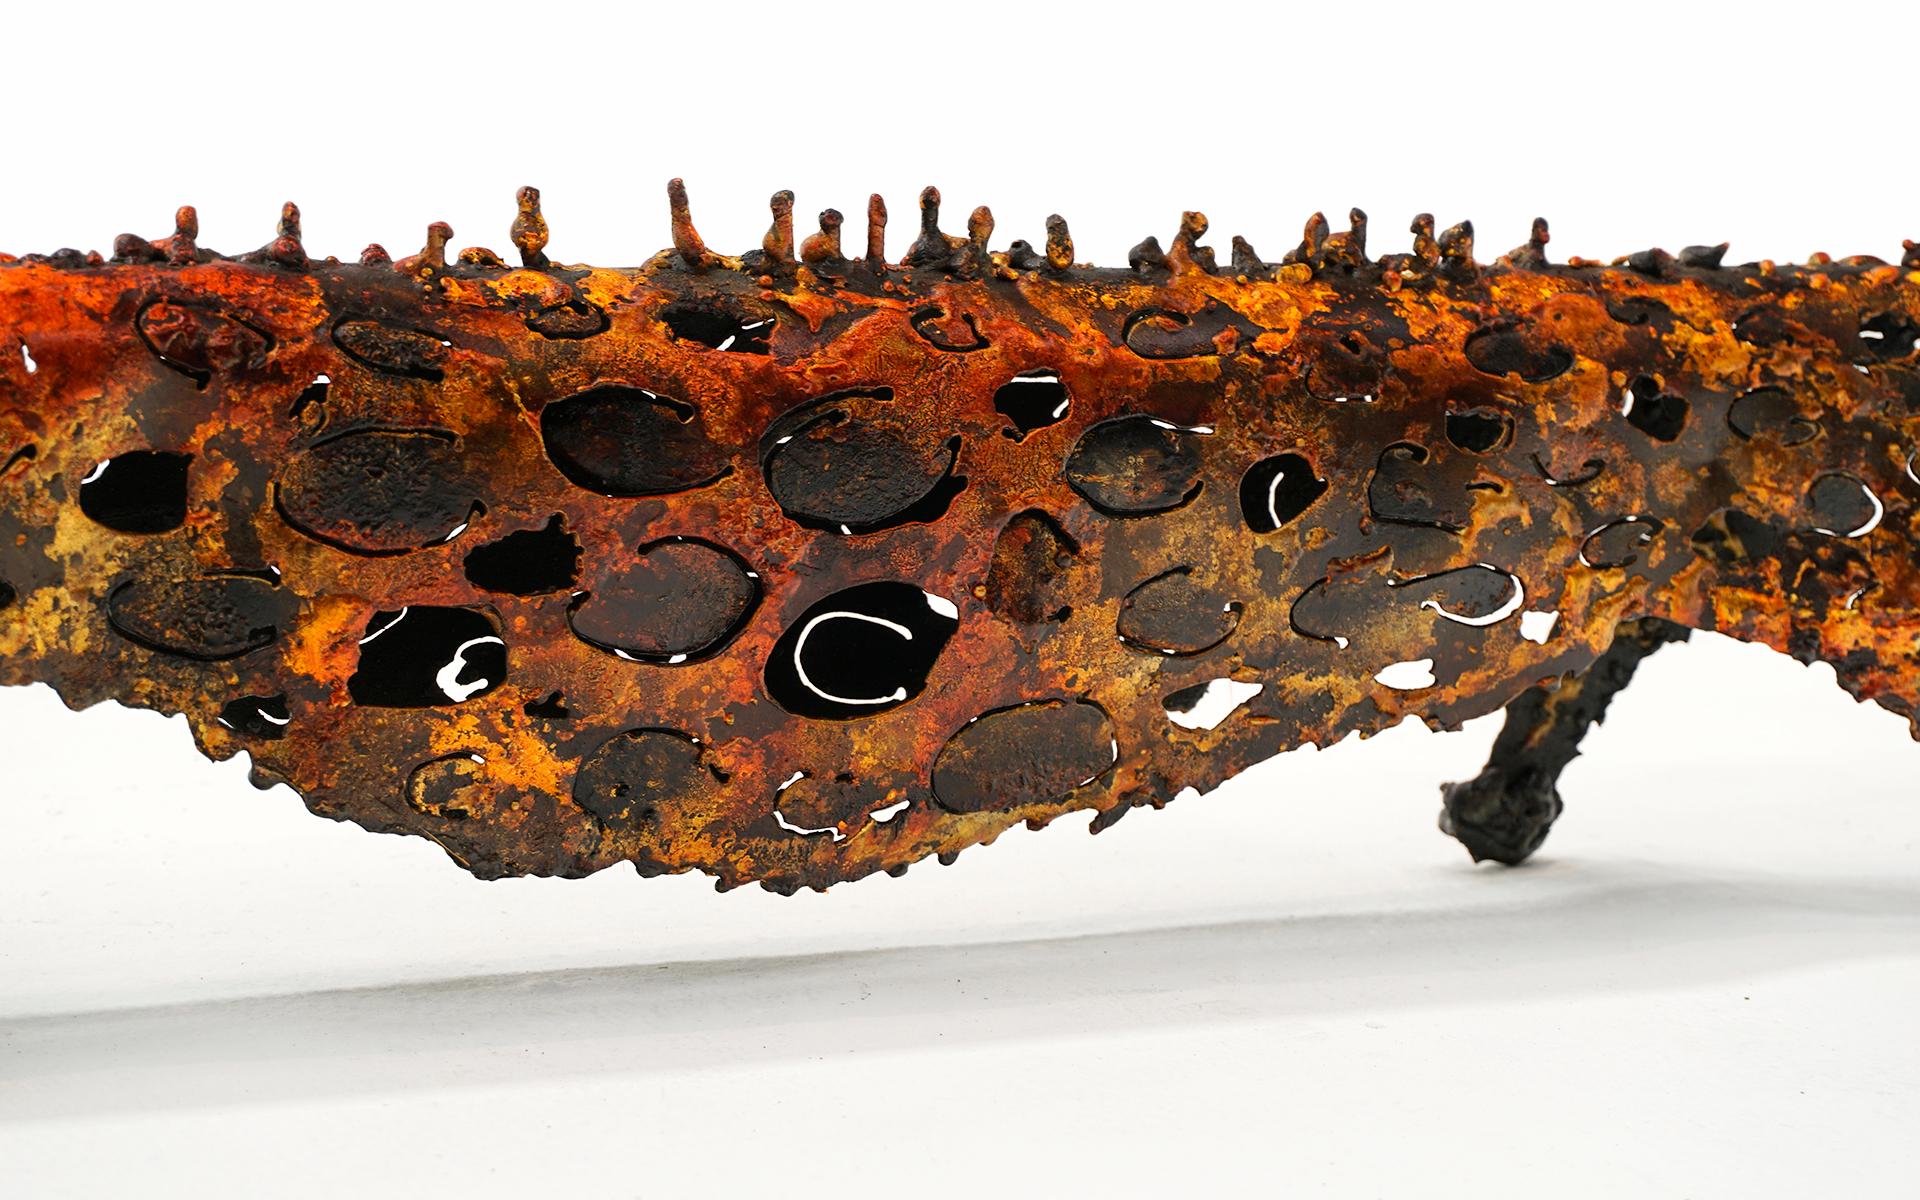 Torch Cut Steel Leopard Sculpture by James Bearden, Orange and Black Enamel In Excellent Condition For Sale In Kansas City, MO